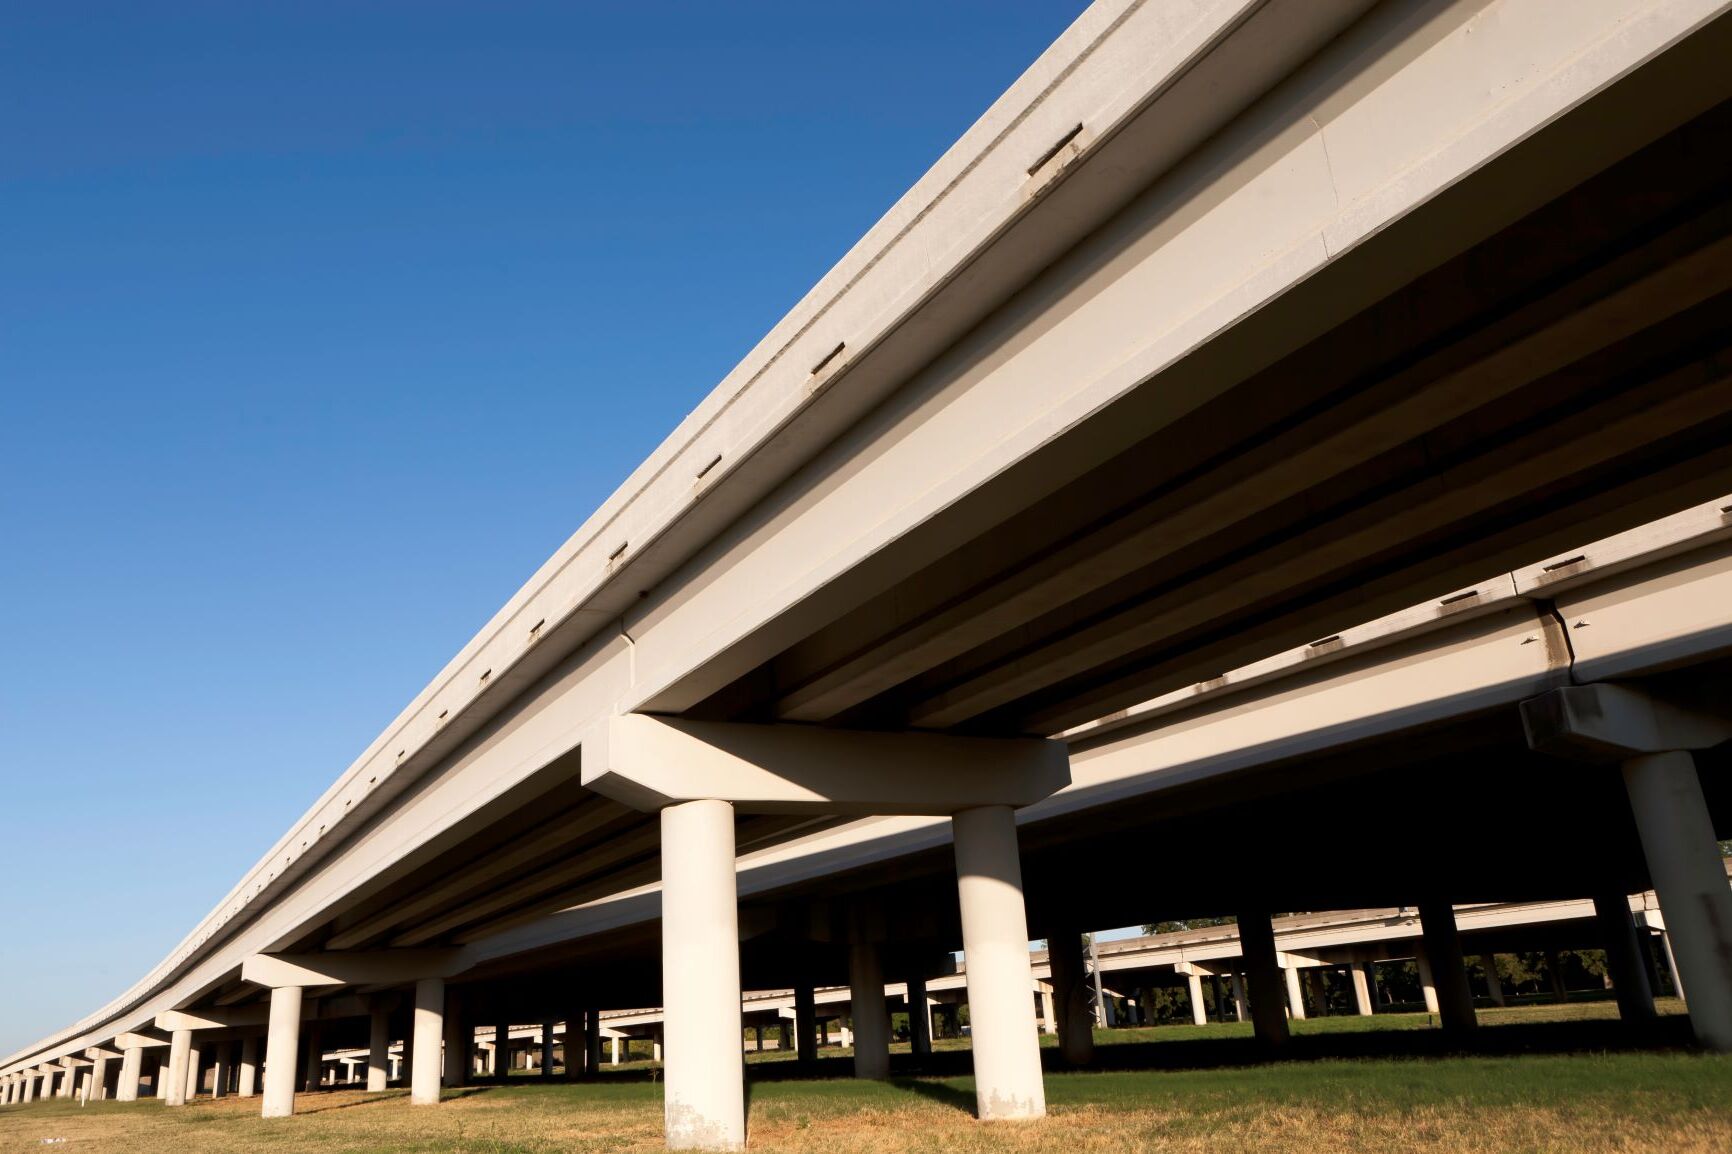 8-facts-about-transportation-and-infrastructure-in-rogers-arkansas